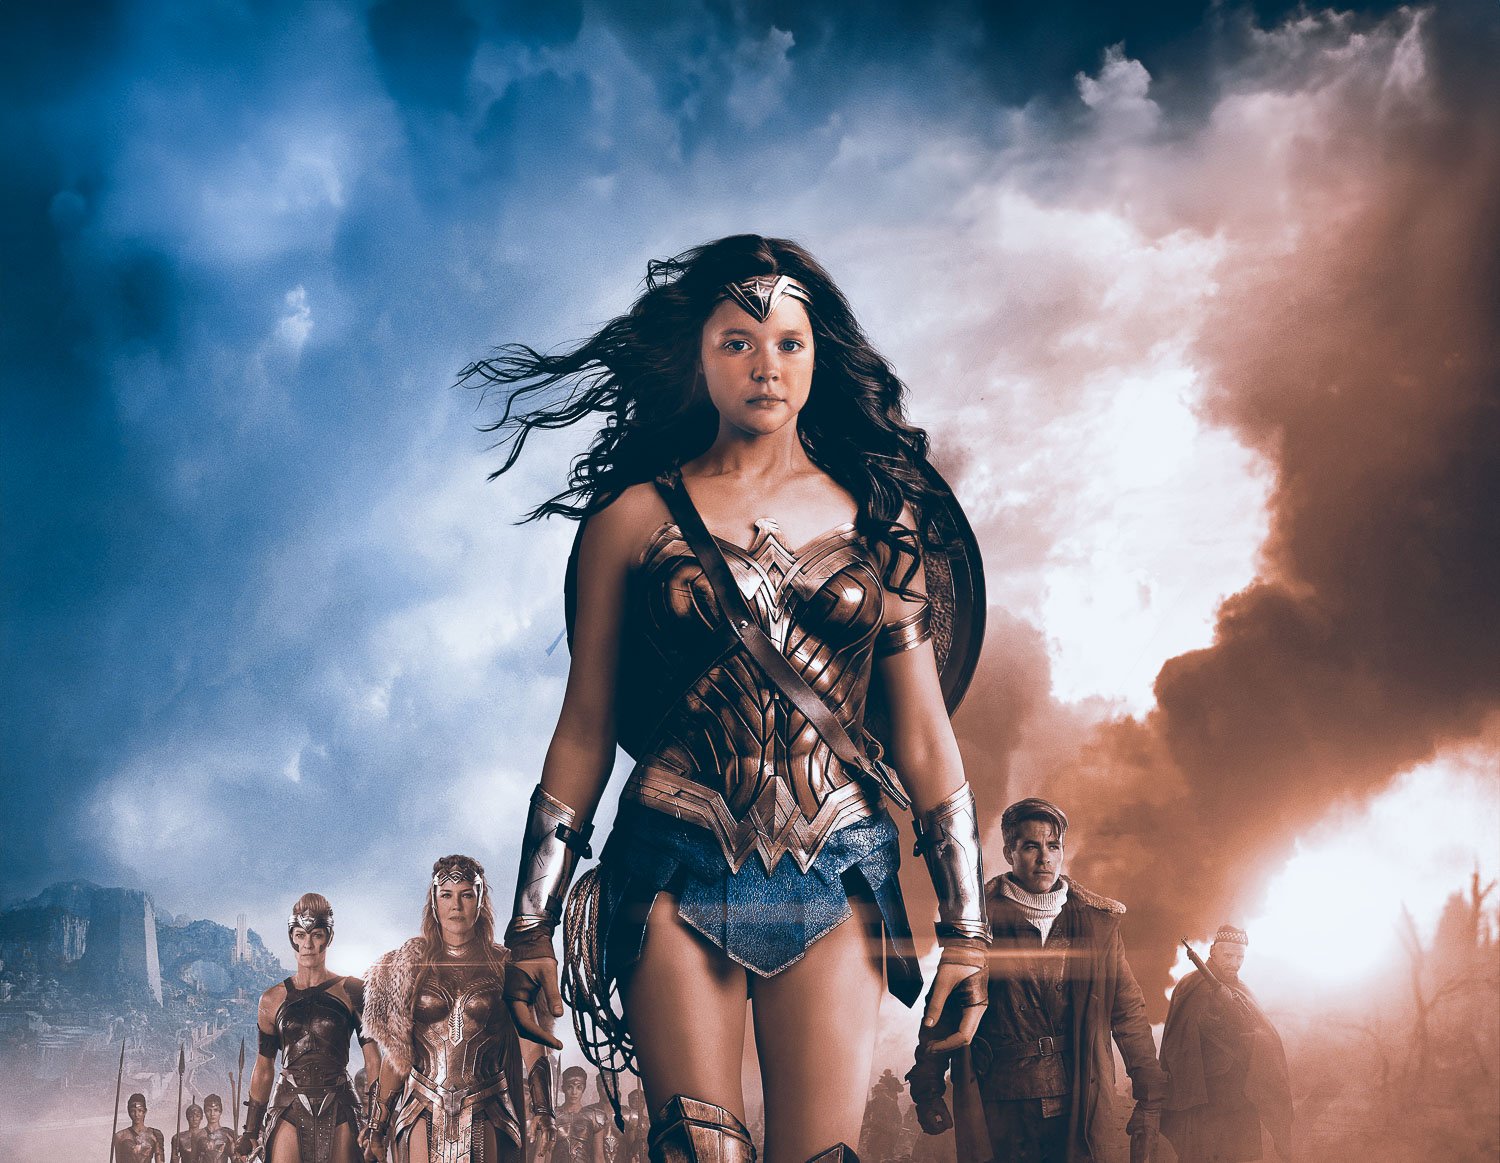 A young girl dressed as Wonder Woman walking with a group of superheros in the background